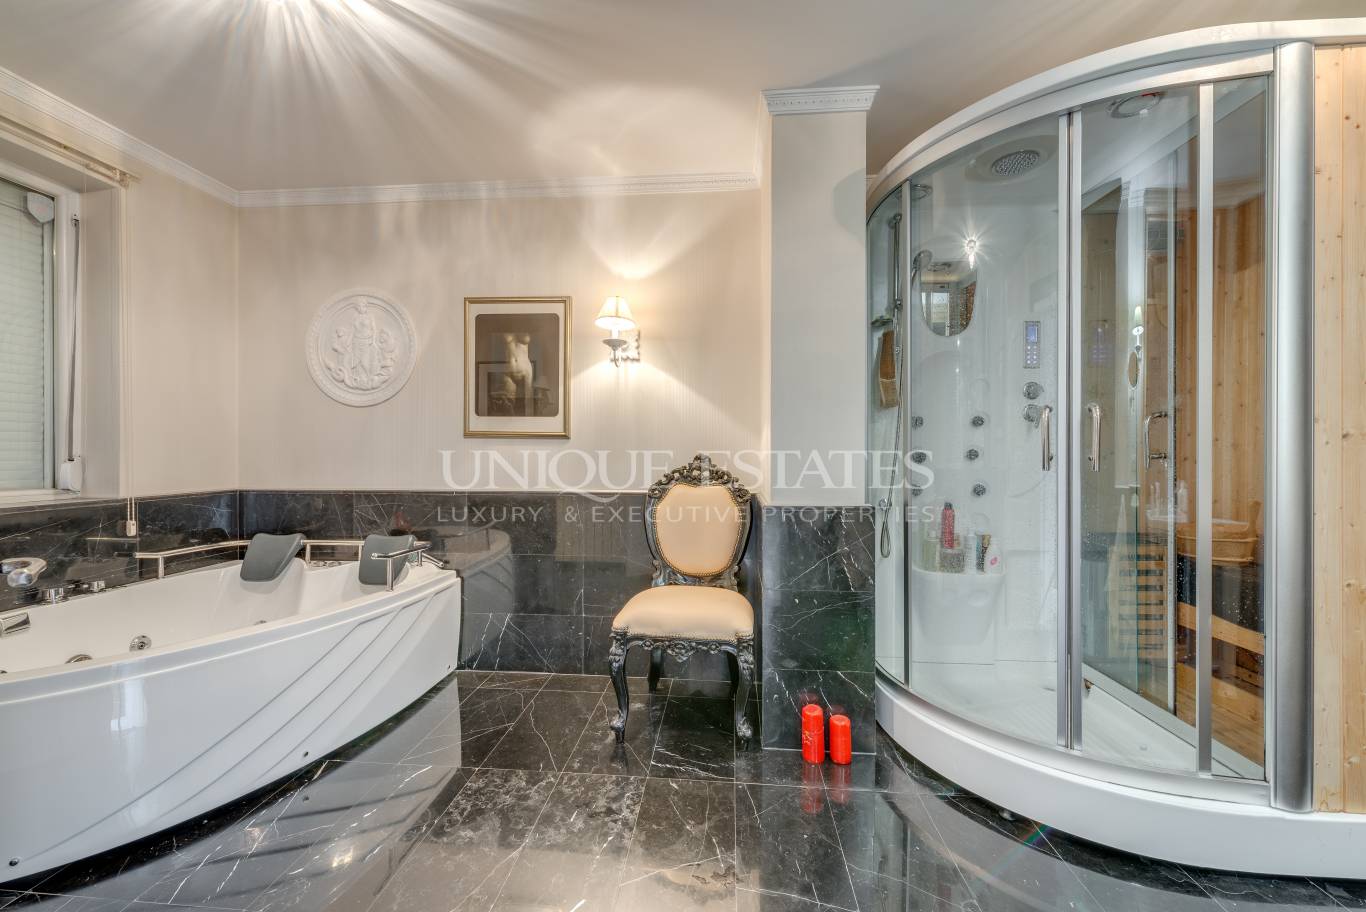 Apartment for sale in Sofia, Ovcha kupel 1 with listing ID: K5018 - image 10